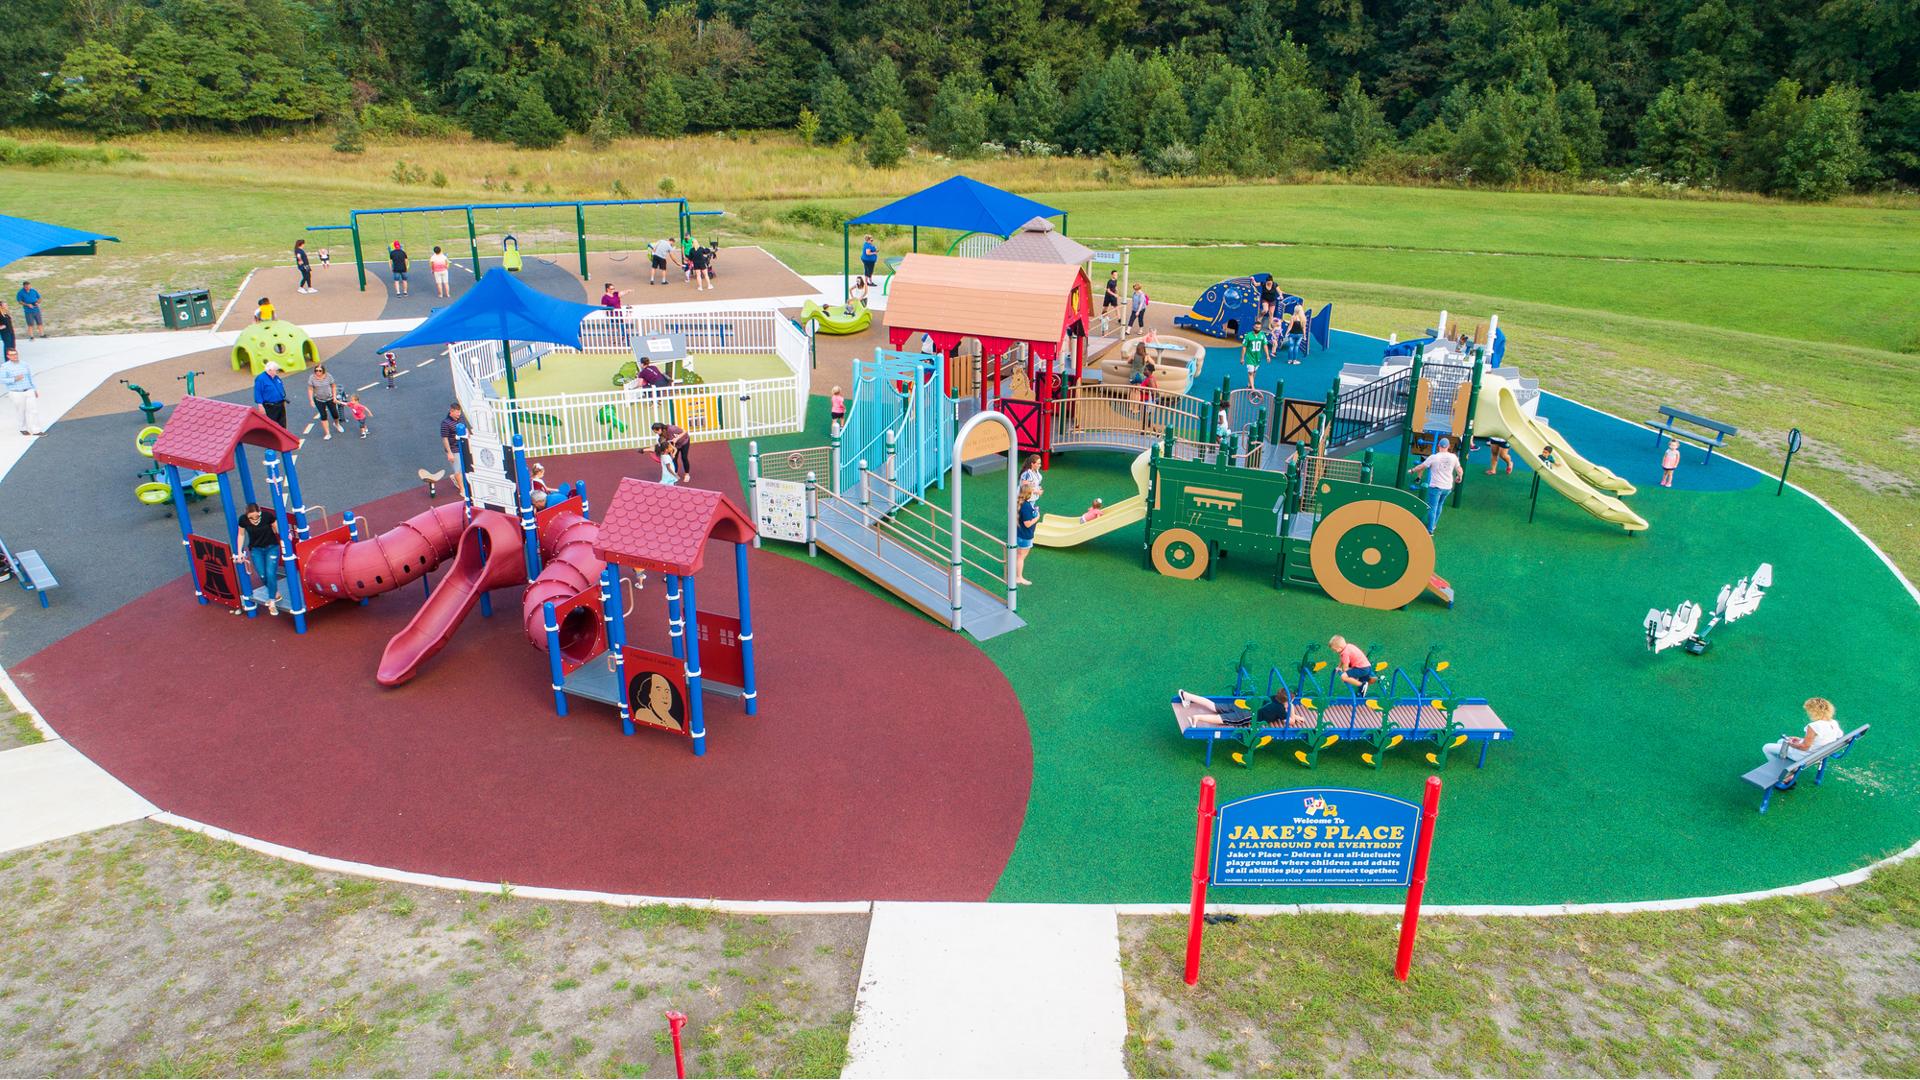 Elevated view of a play area with multiple farm themed play structures. One structure is designed like a red barn while another a green tractor. 